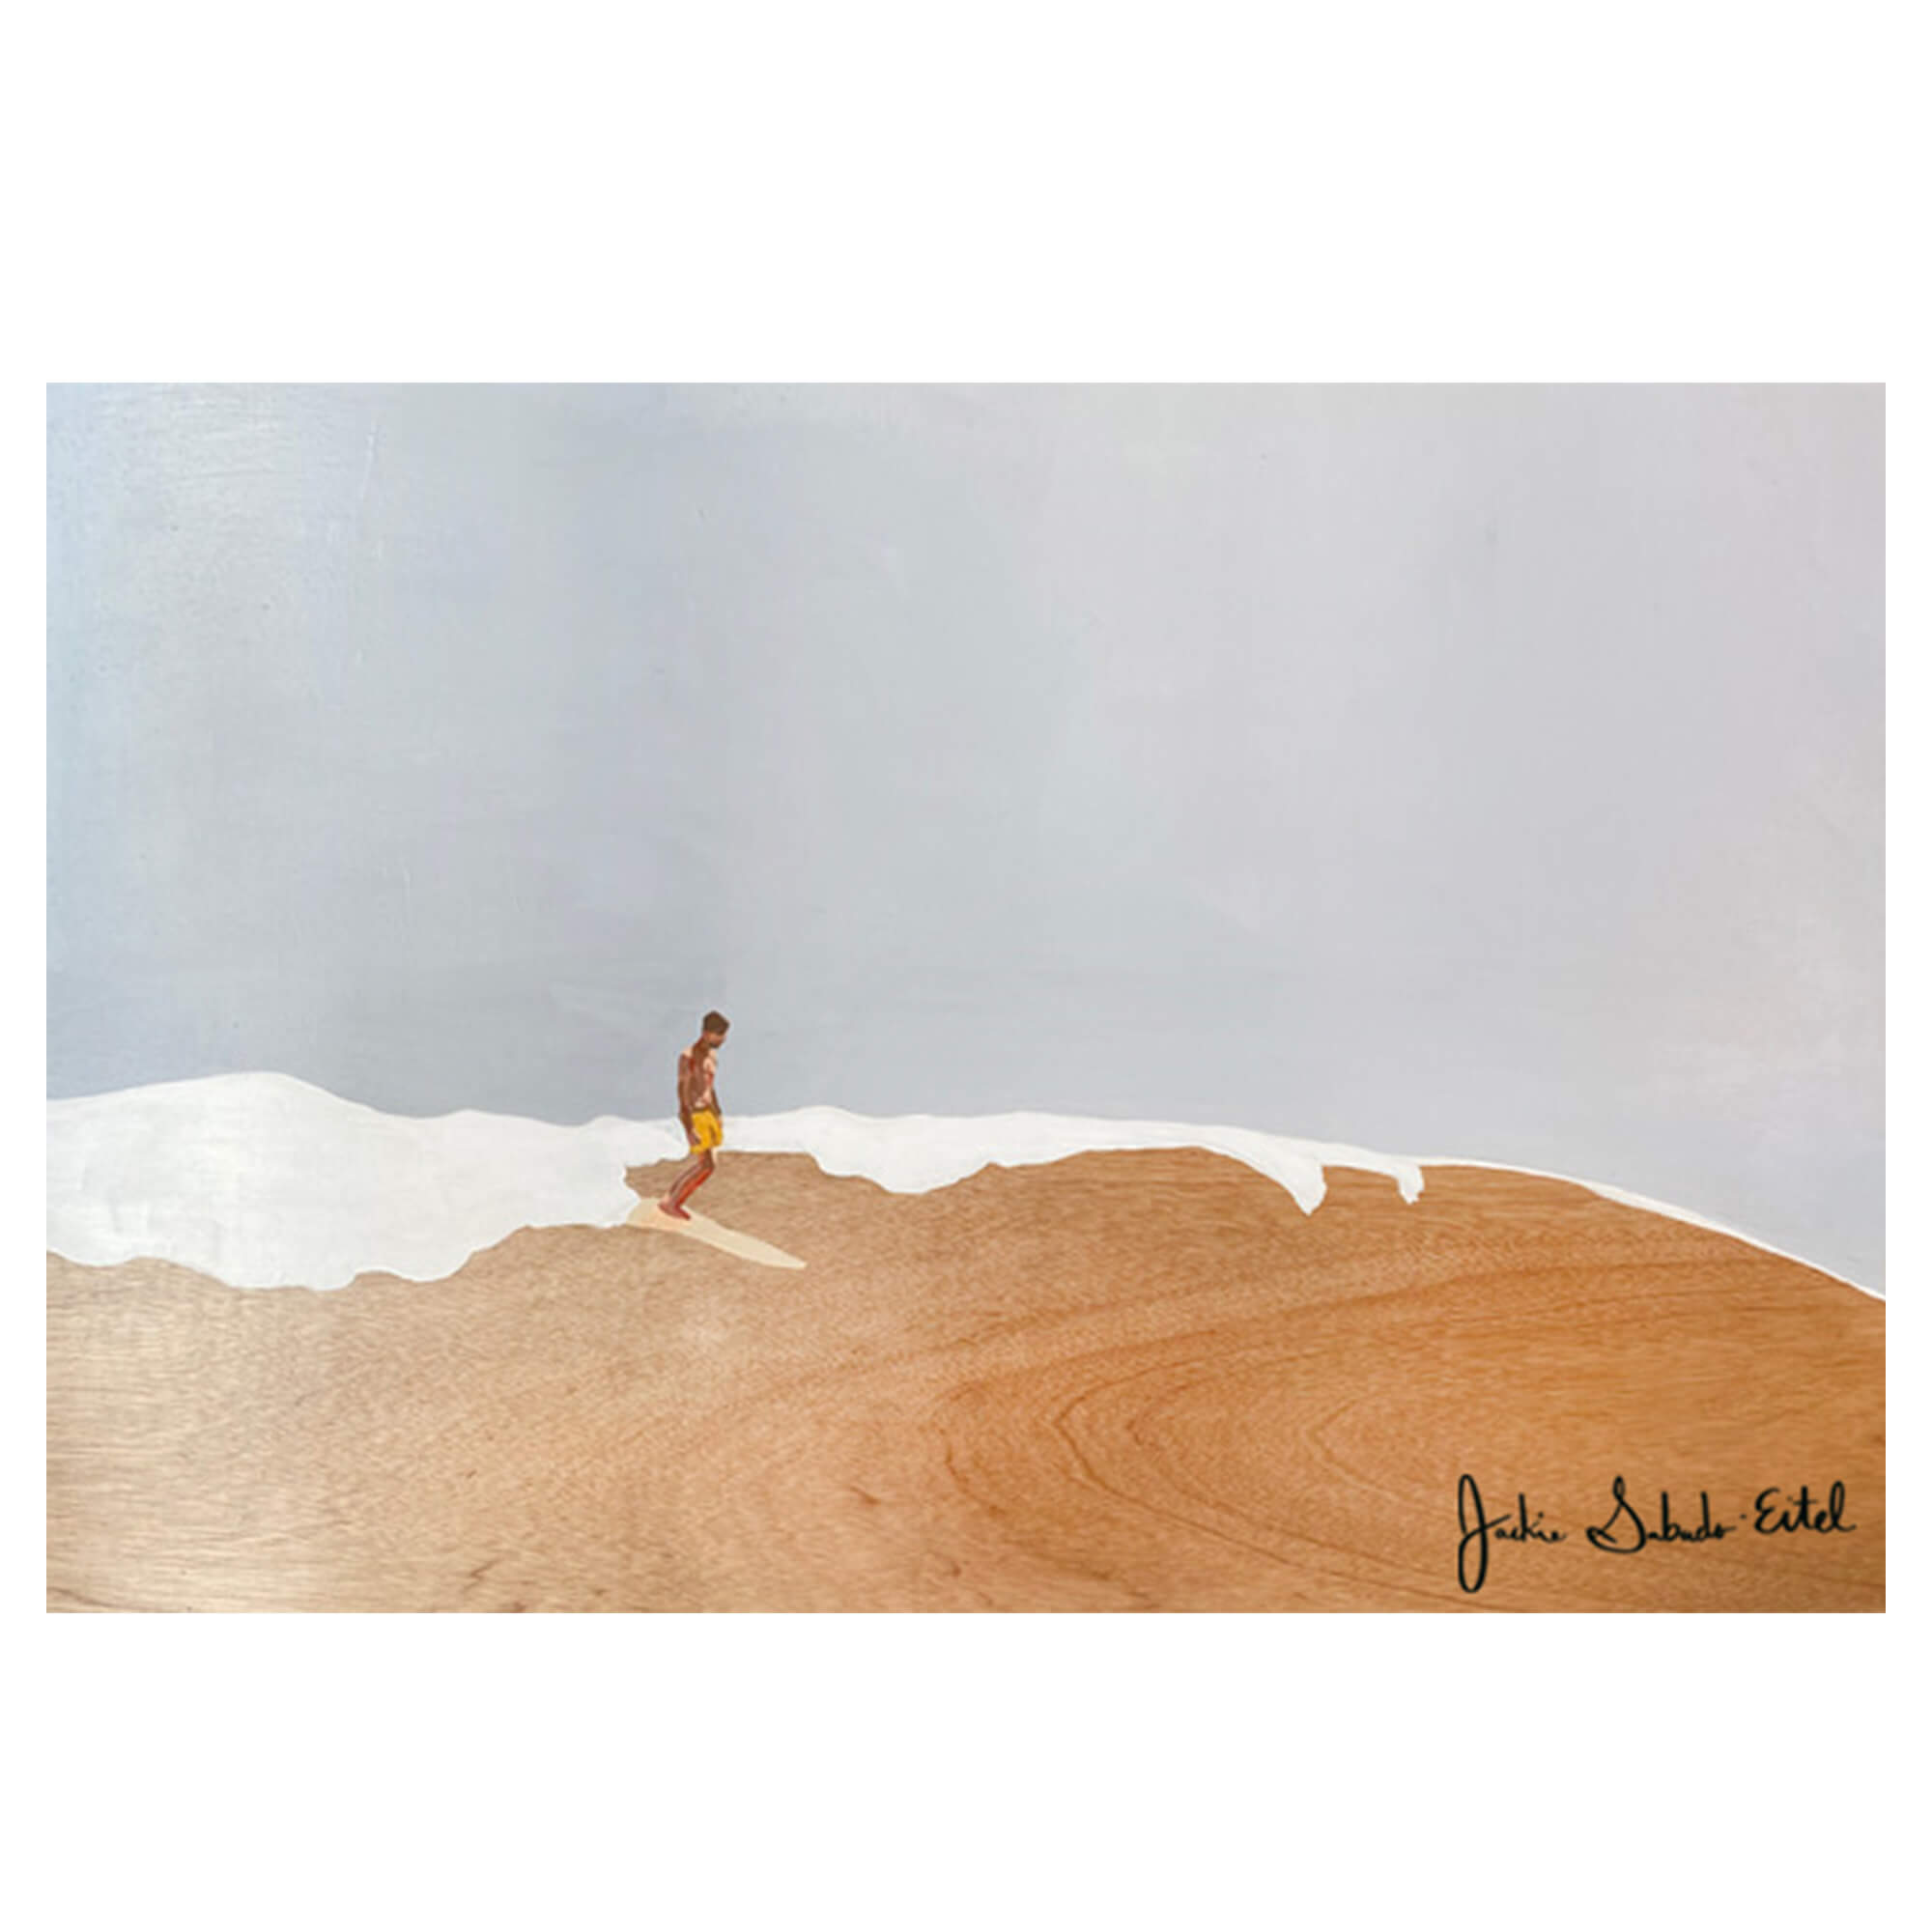 A matted art print featuring a man peacefully riding the epic waves of Hawaii by Hawaii artist Jackie Eitel